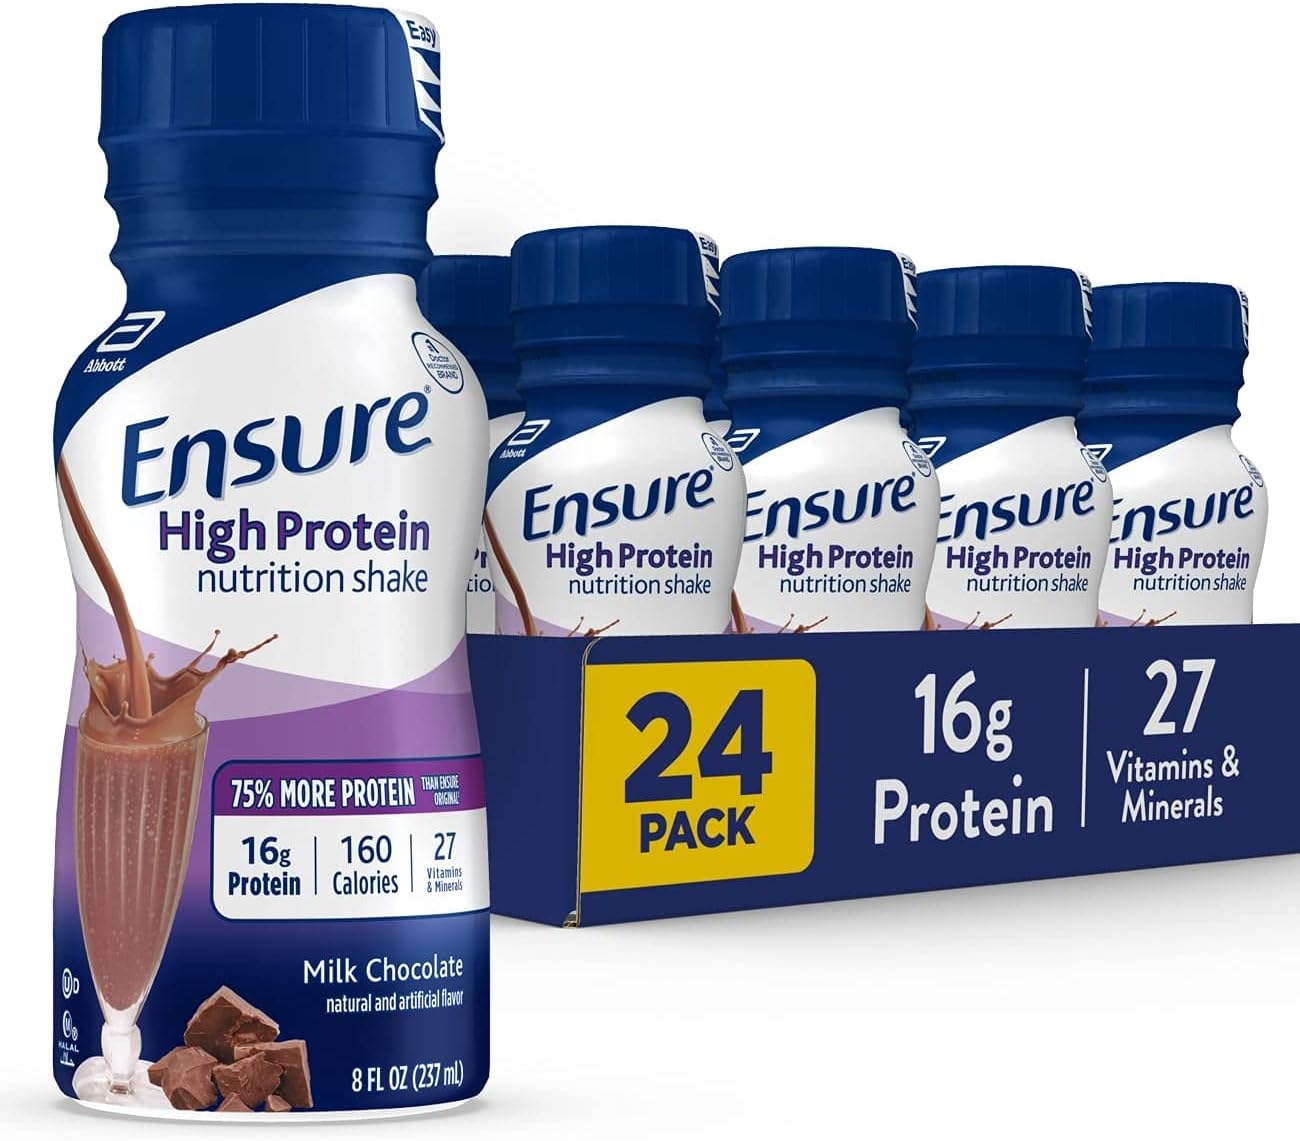 Ensure High Protein Nutritional Shake with 16g of Protein, Ready-to-Drink Meal Replacement Shakes, Low Fat, Milk Chocolate, 8 fl oz, 24 Count